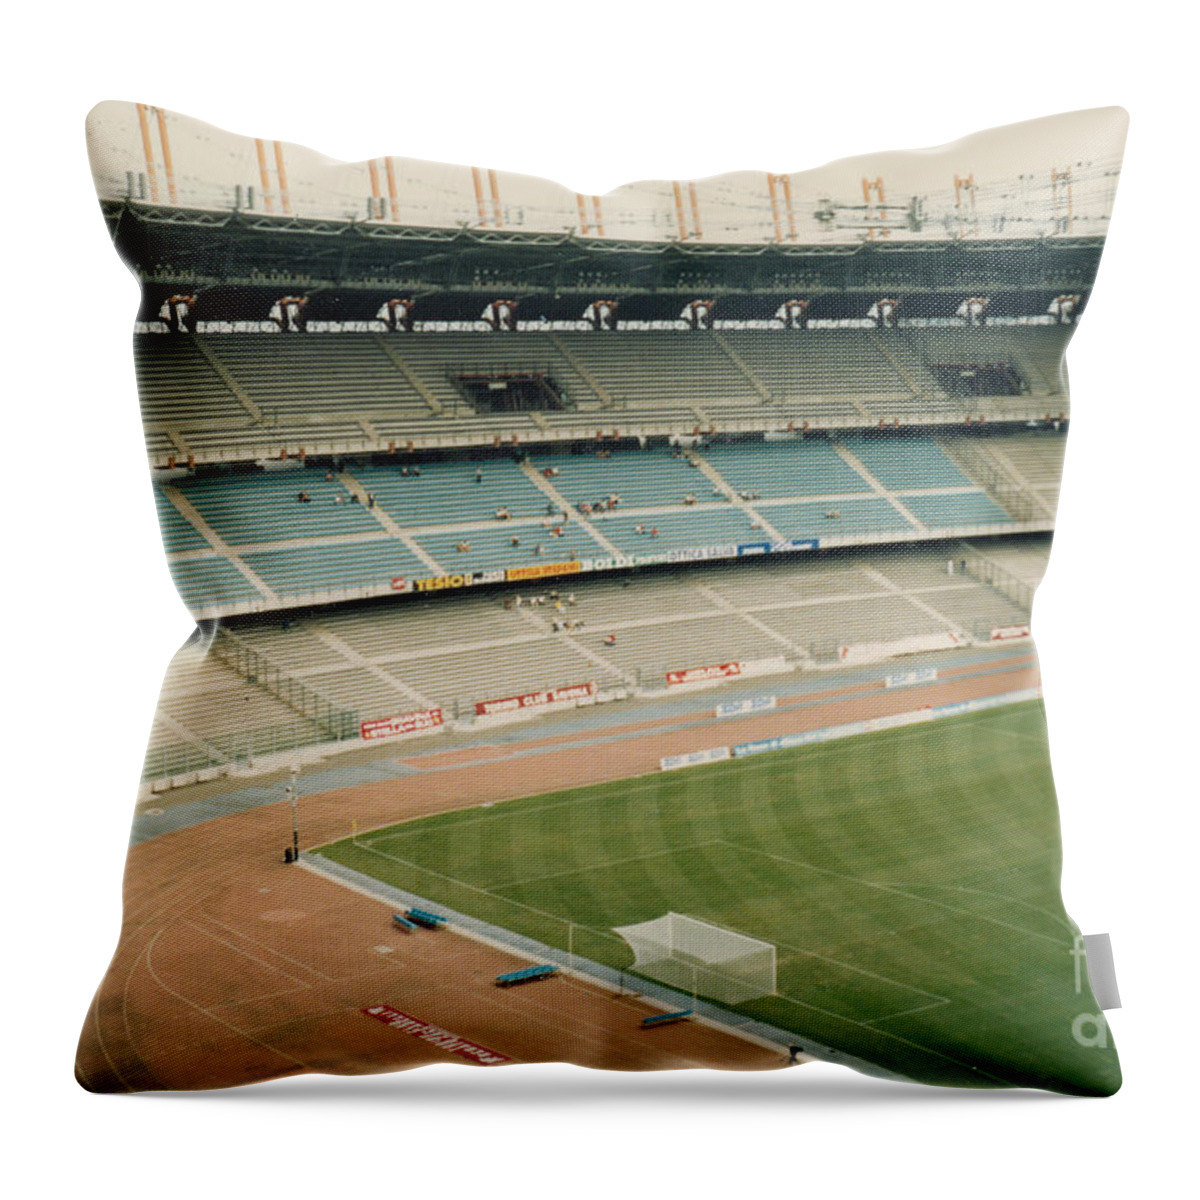  Throw Pillow featuring the photograph Juventus - Stadio delle Alpi - Noth Stand 1 - September 1997 by Legendary Football Grounds